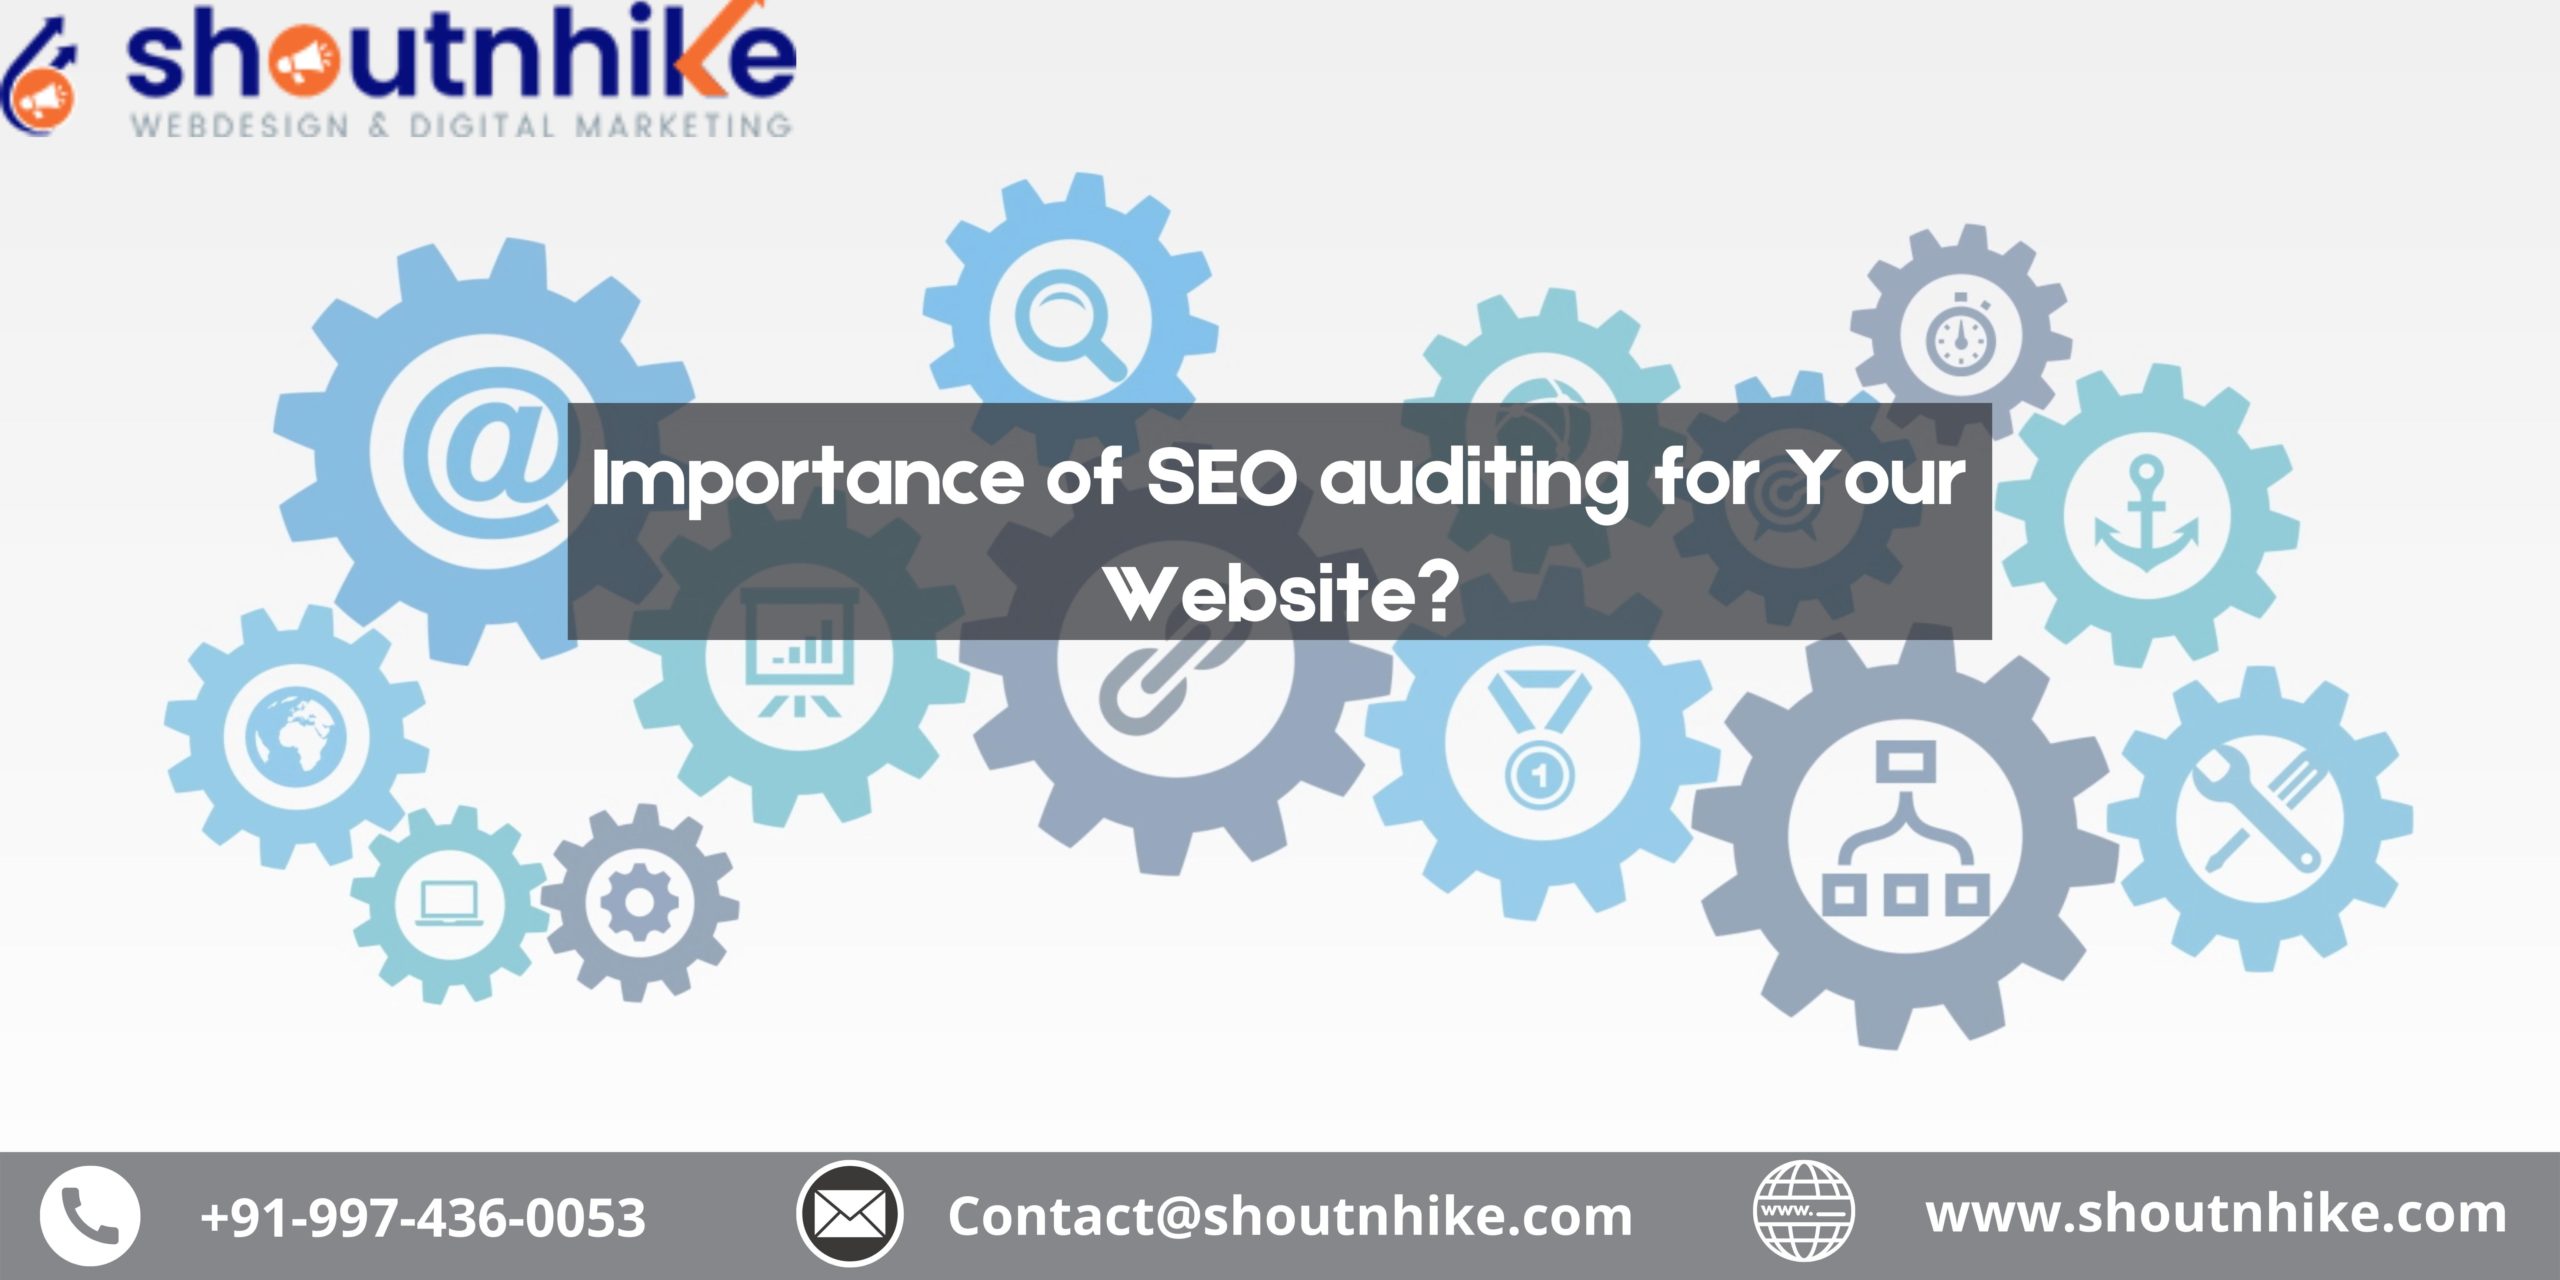 Importance of SEO auditing for Your Website